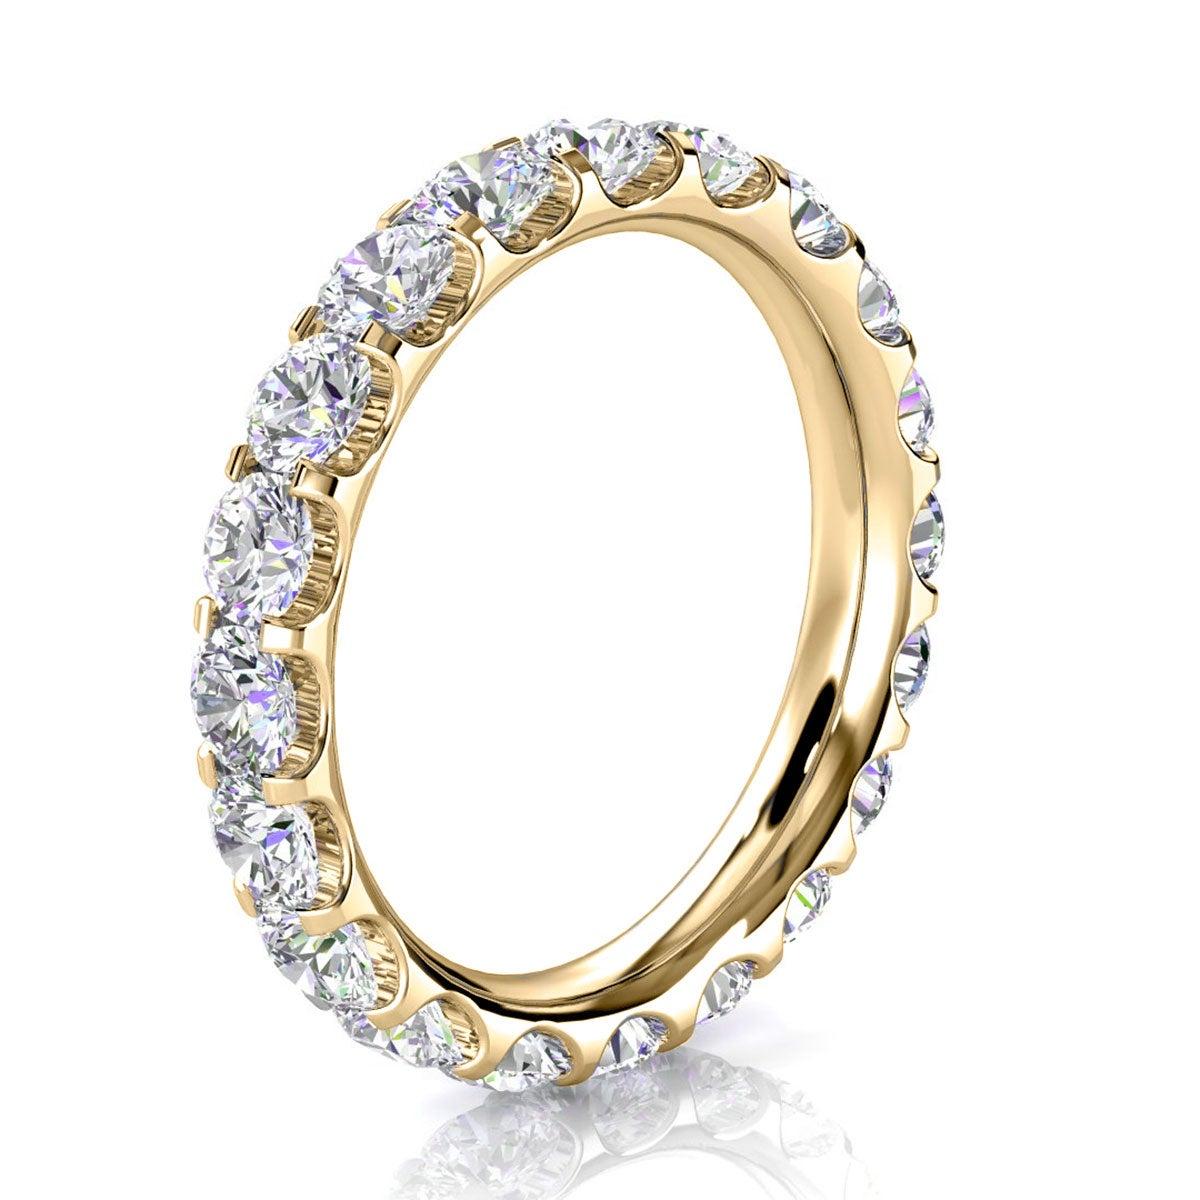 For Sale:  14k Yellow Gold Viola Eternity Micro-Prong Diamond Ring '2 Ct. Tw' 2